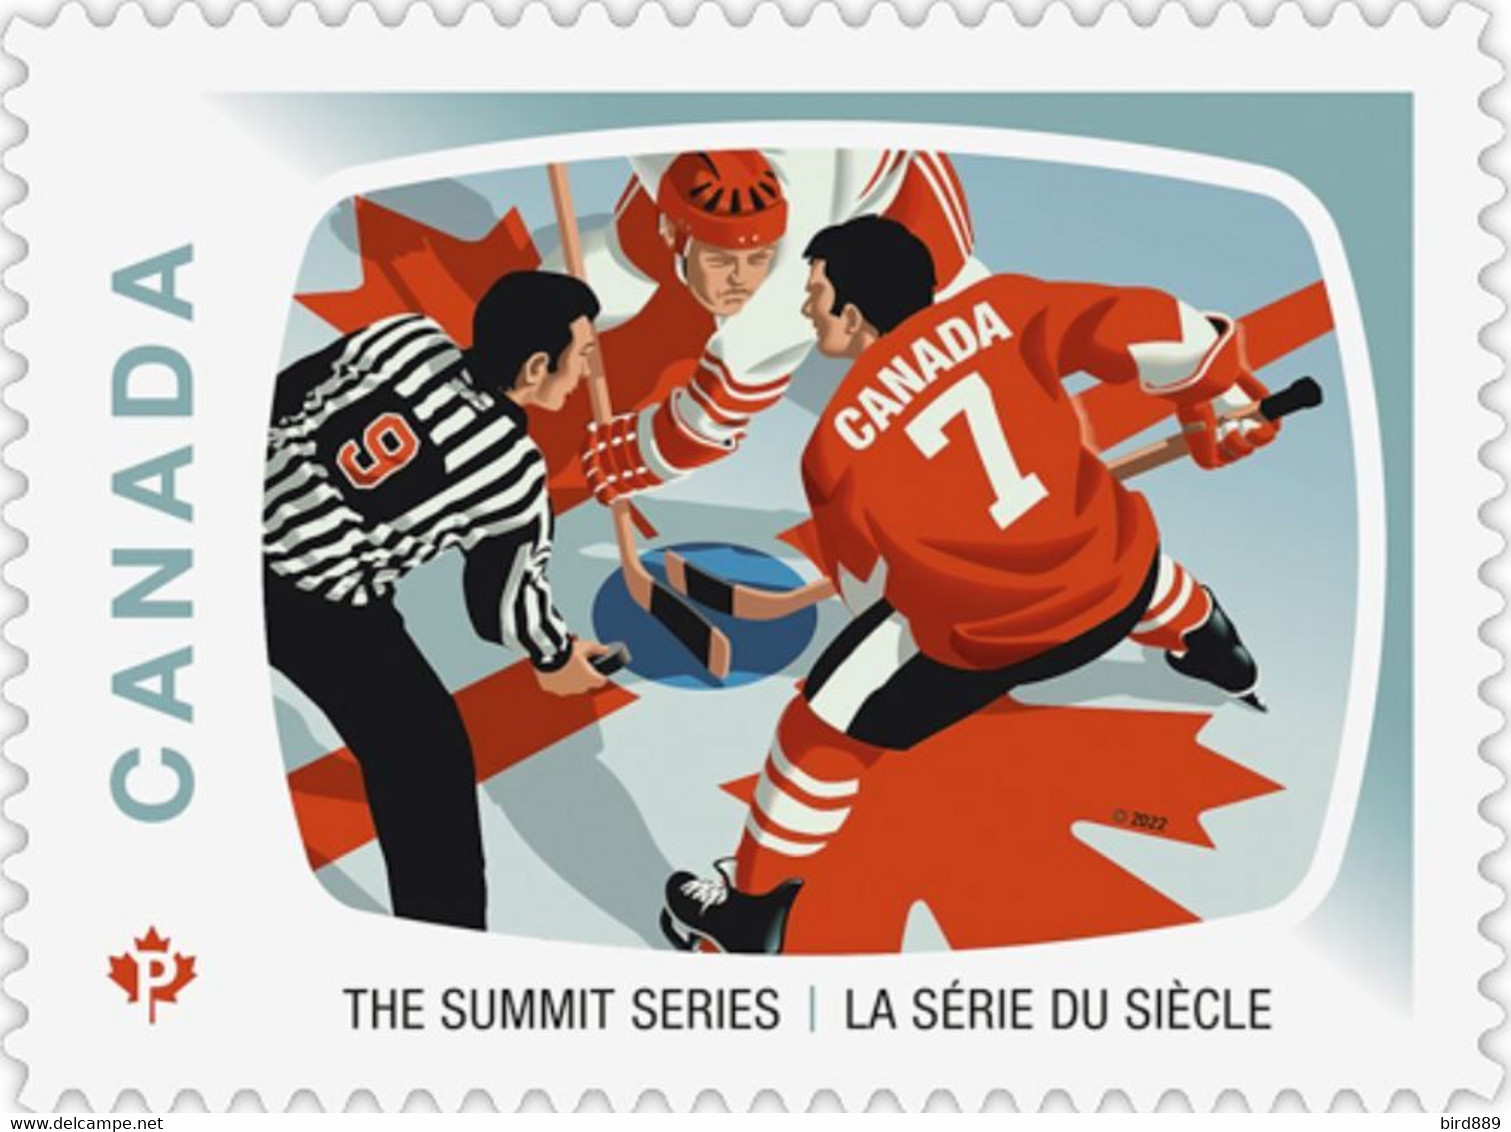 2022 Canada USSR Hockey The Summit Series Single Stamp From Booklet MNH - Single Stamps